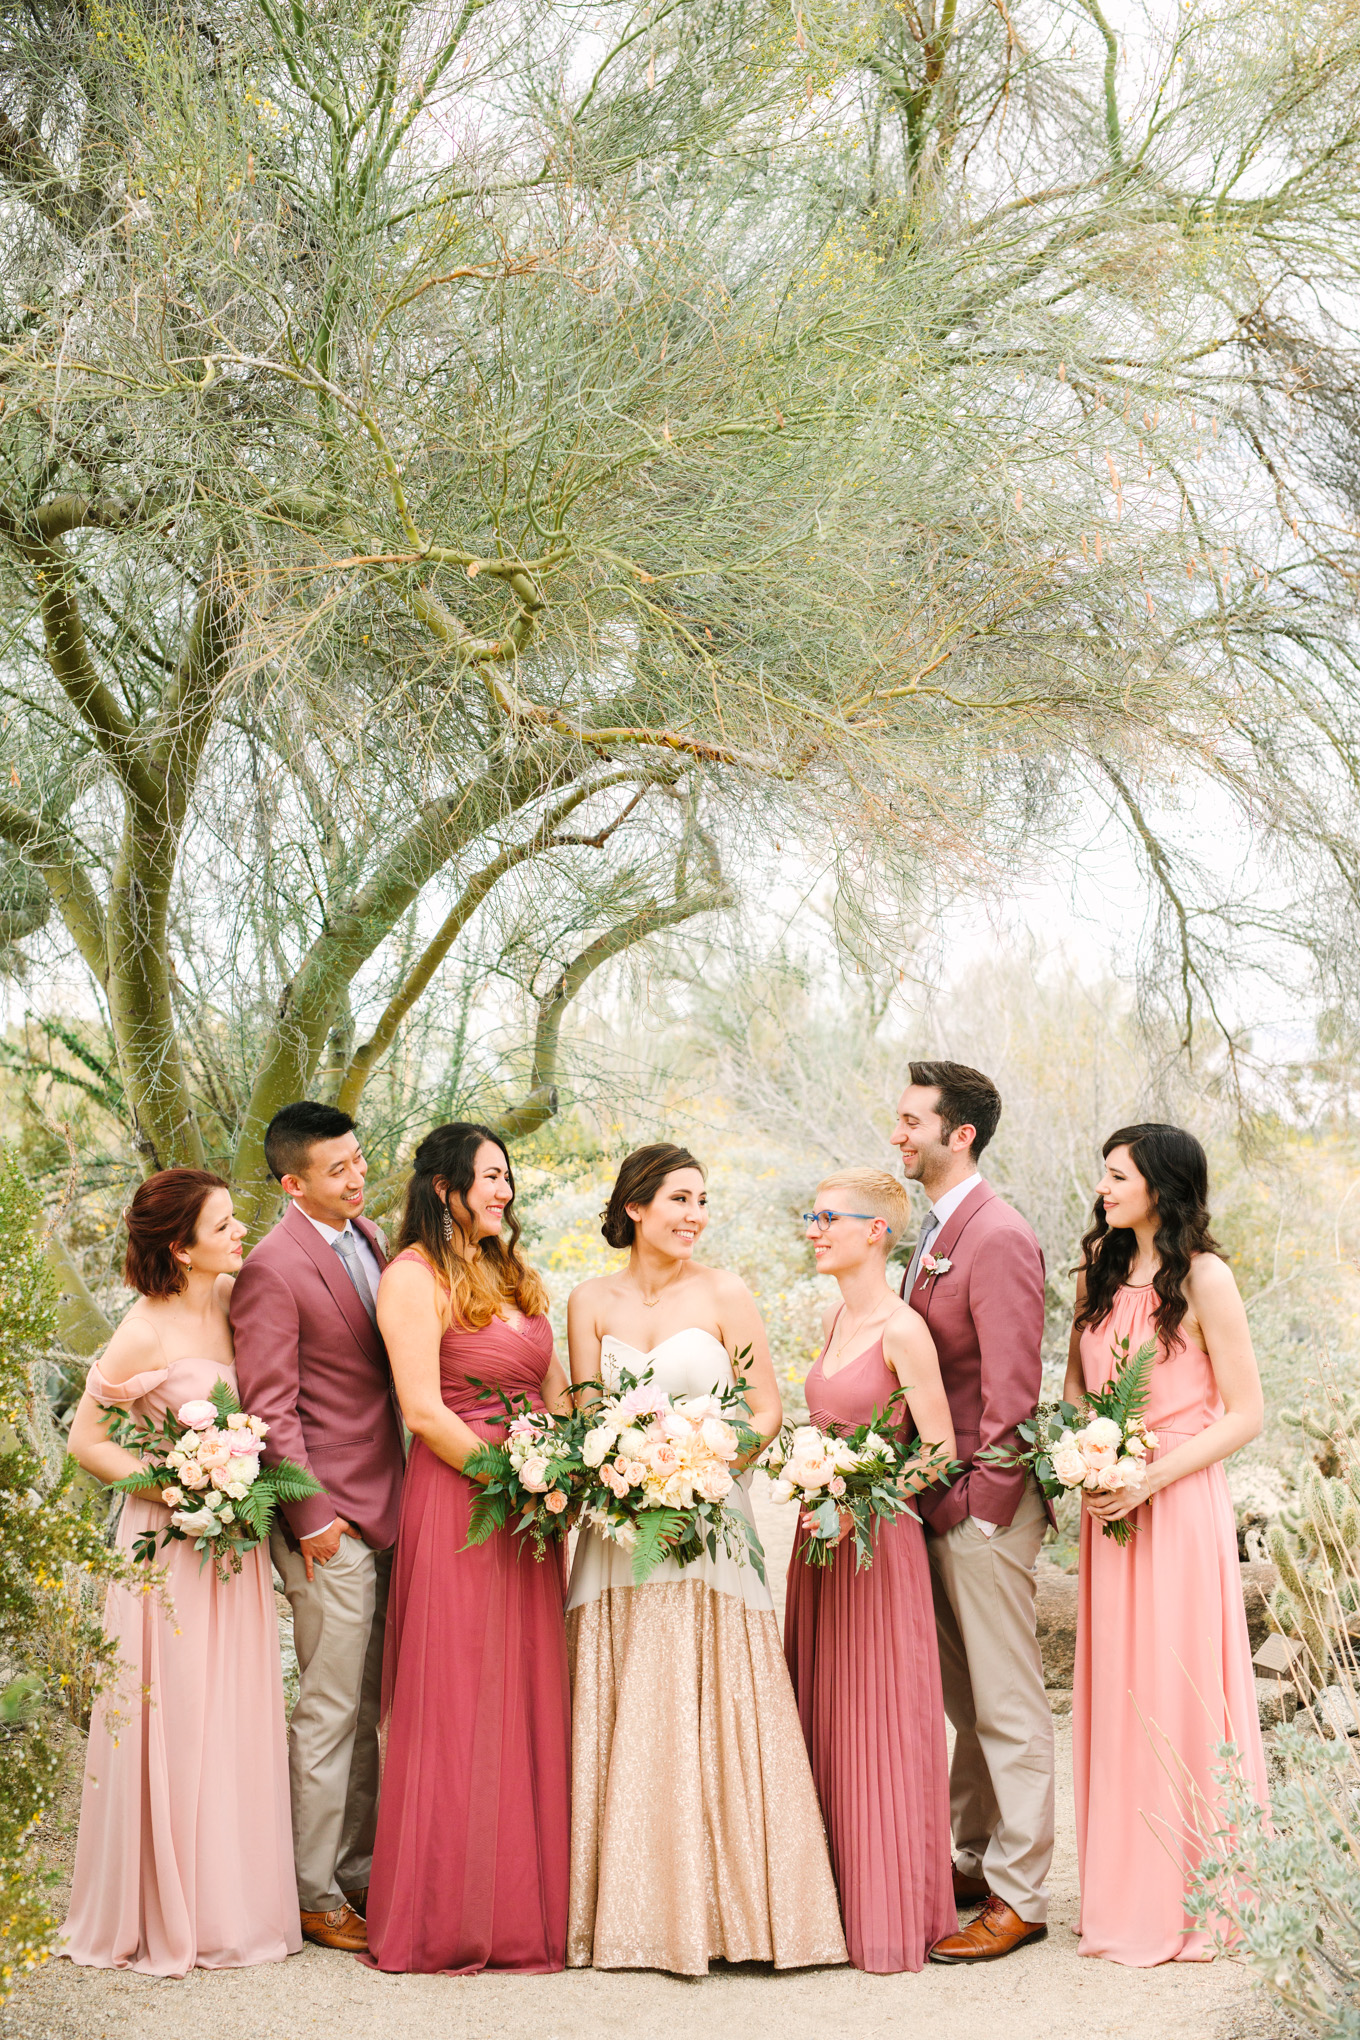 Wedding party in pink blush tones at Living Desert Zoo | Best Southern California Garden Wedding Venues | Colorful and elevated wedding photography for fun-loving couples | #gardenvenue #weddingvenue #socalweddingvenue #bouquetideas #uniquebouquet   Source: Mary Costa Photography | Los Angeles 